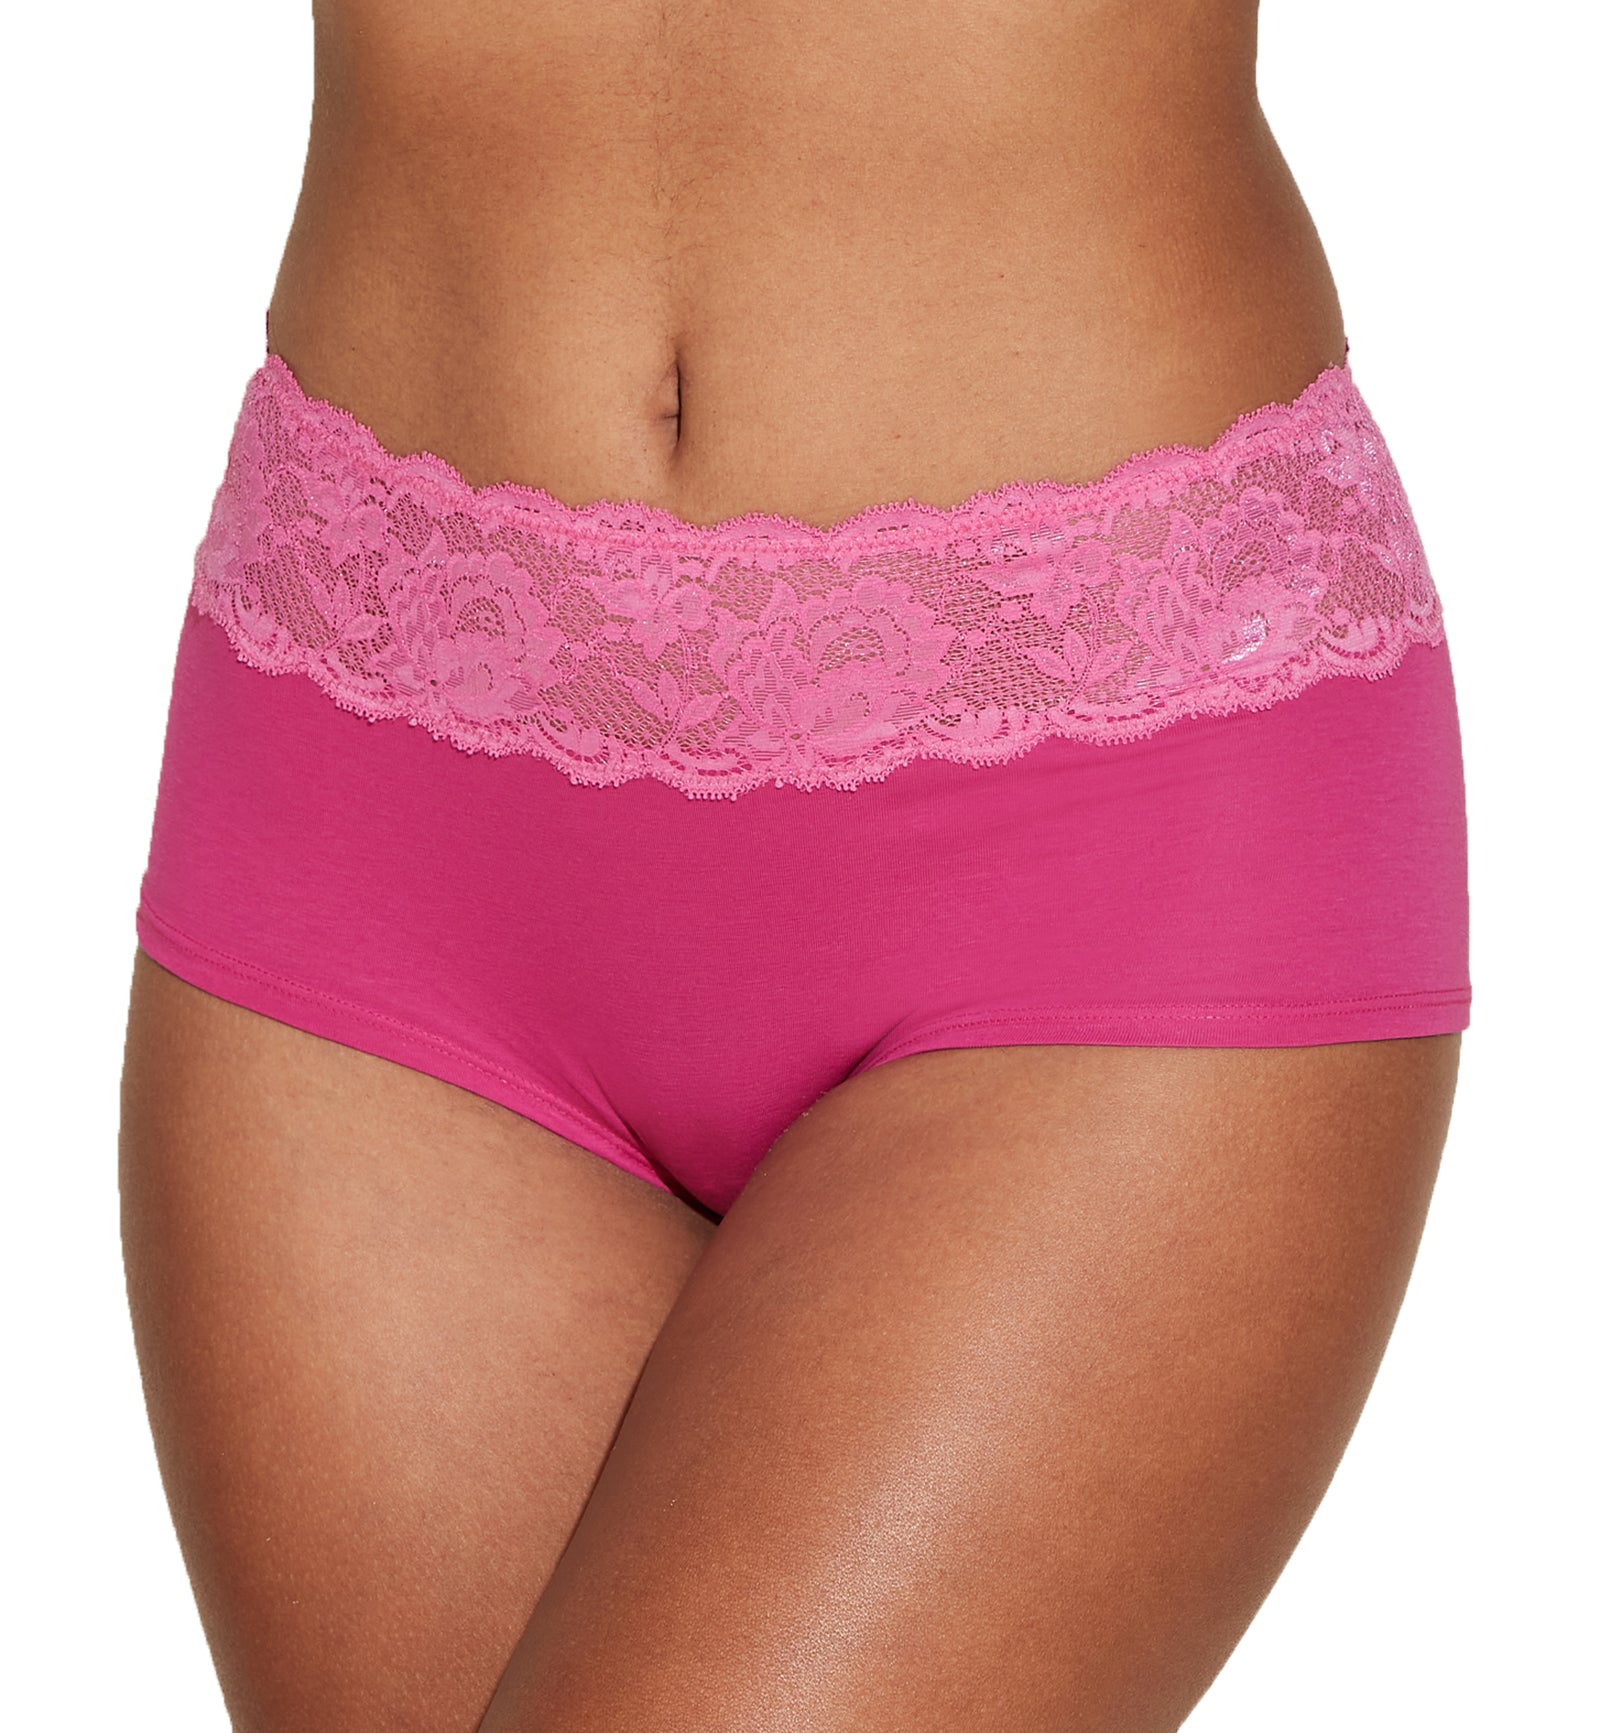 Cosabella Never Say Never Peachie Hotpant (NEVER0743),S/M,Rani Pink - Rani Pink,S/M